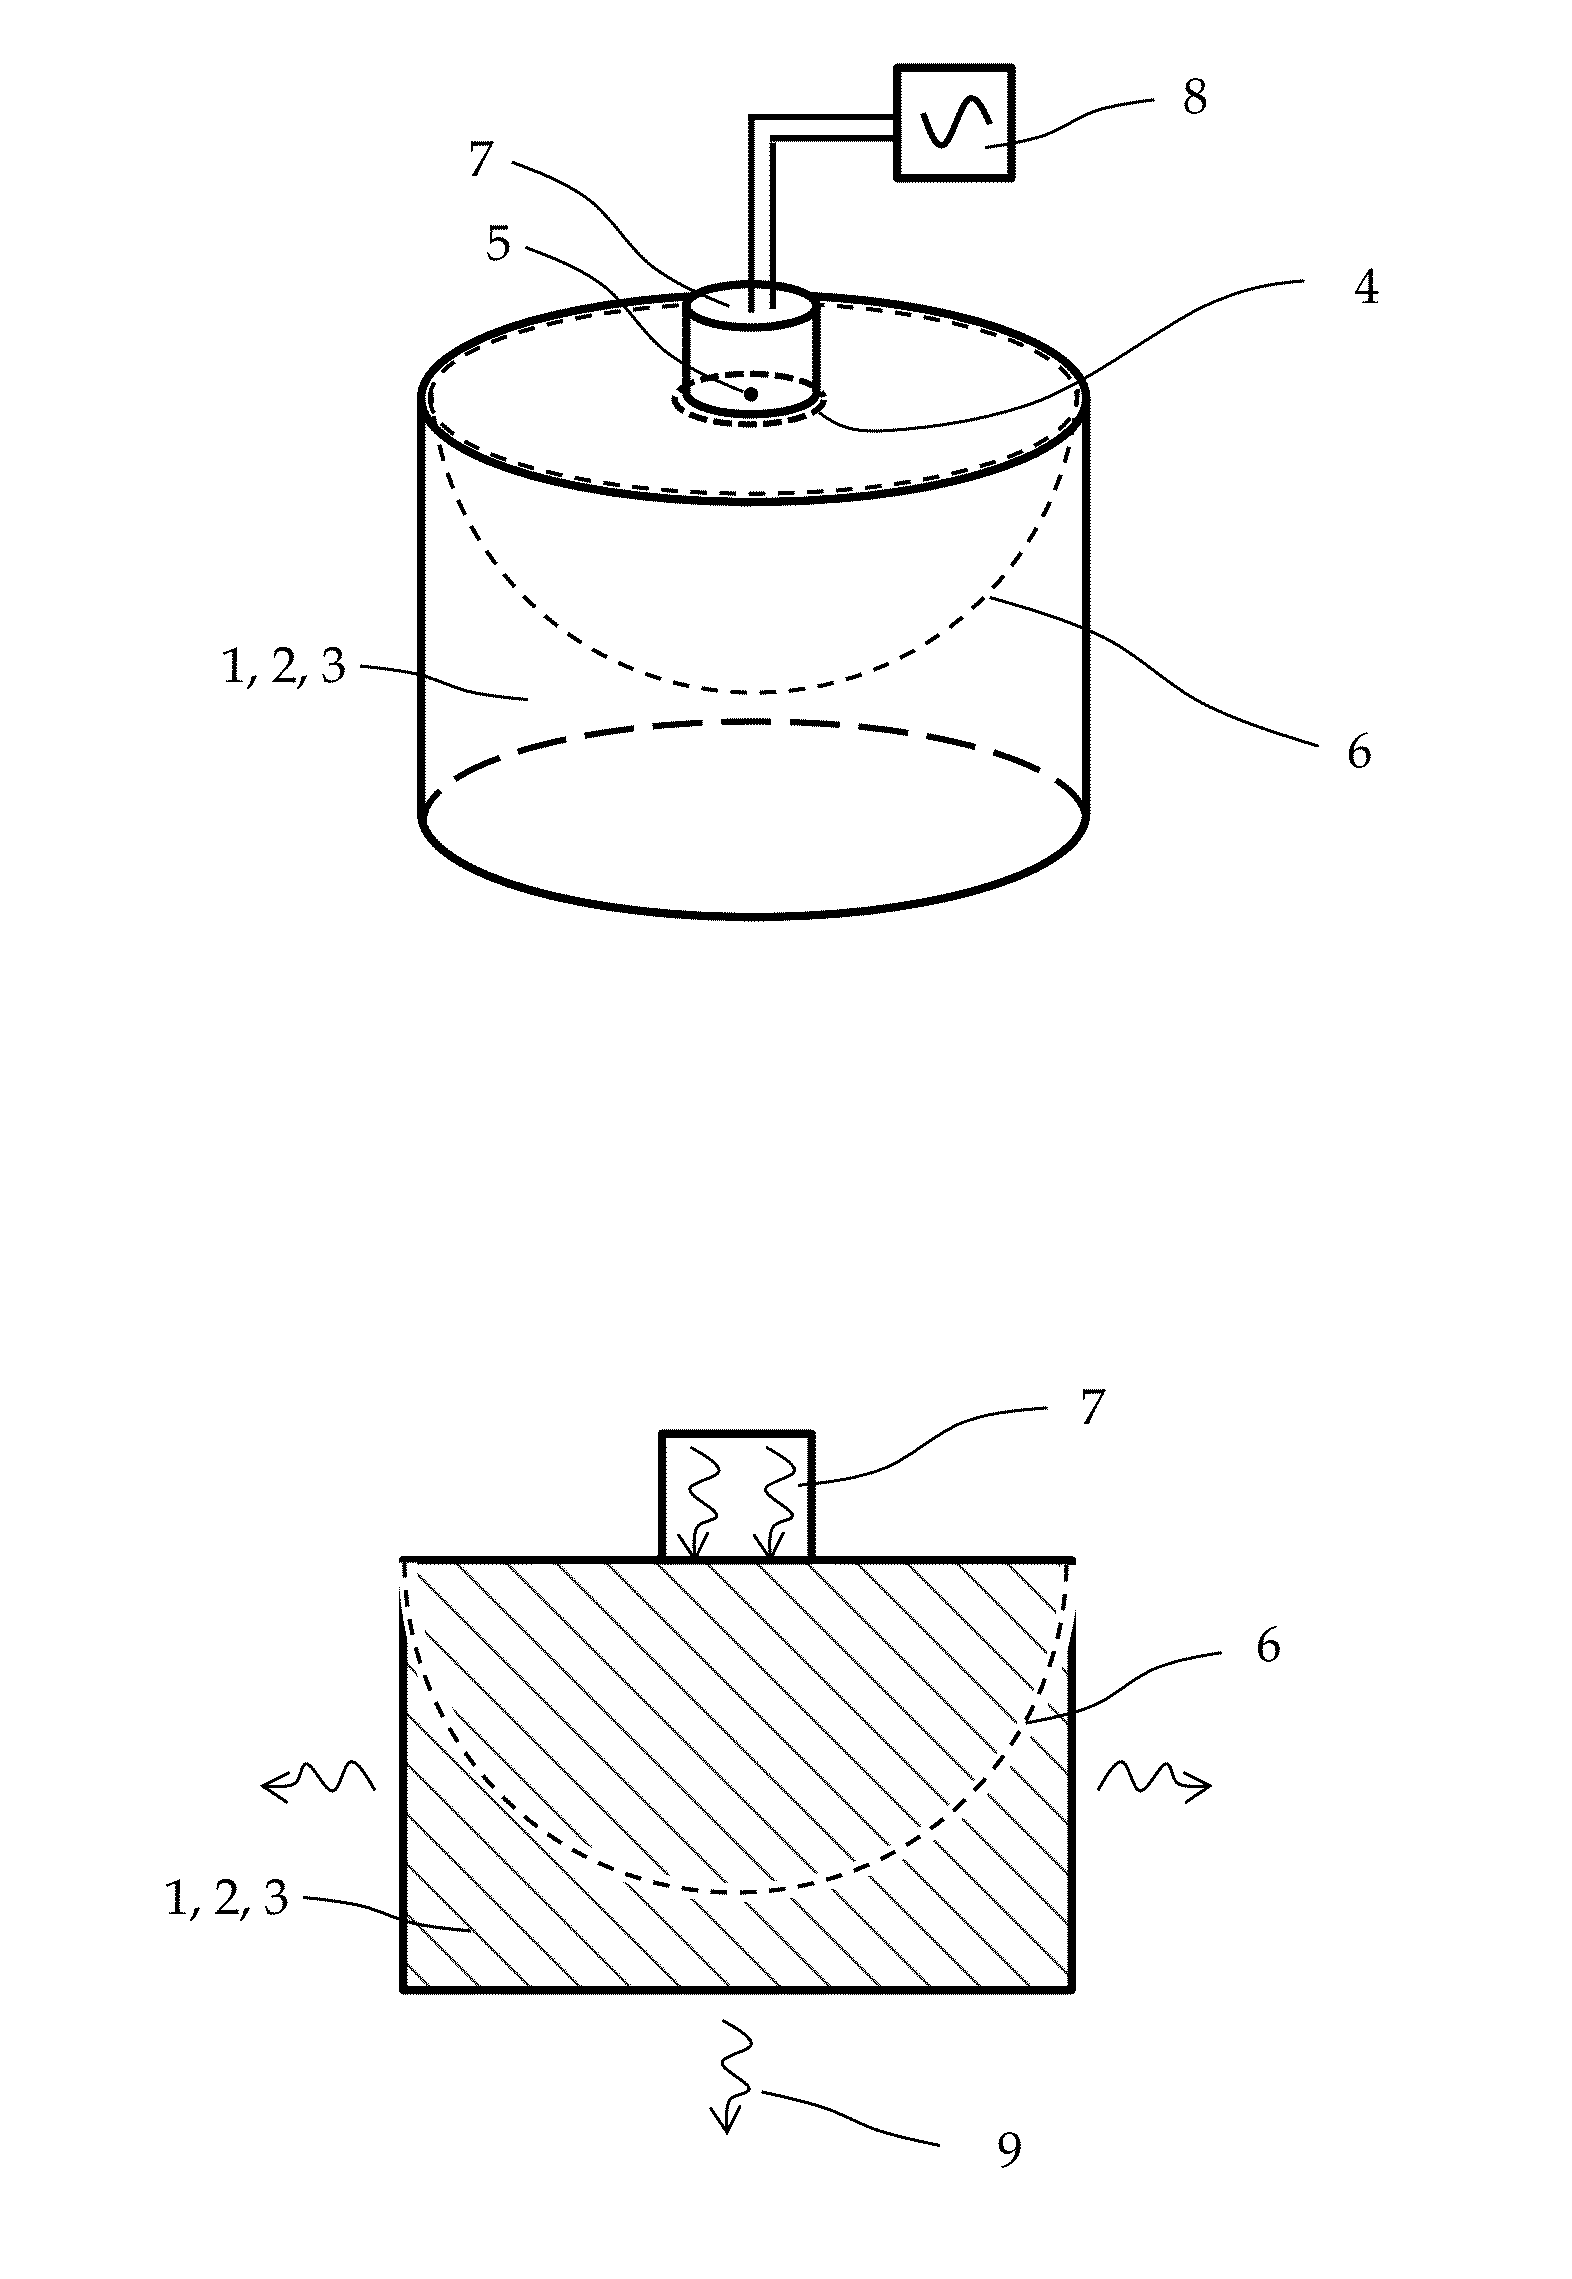 Apparatus and method for assessing thermo-mechanical fatigue related phenomena within a test material